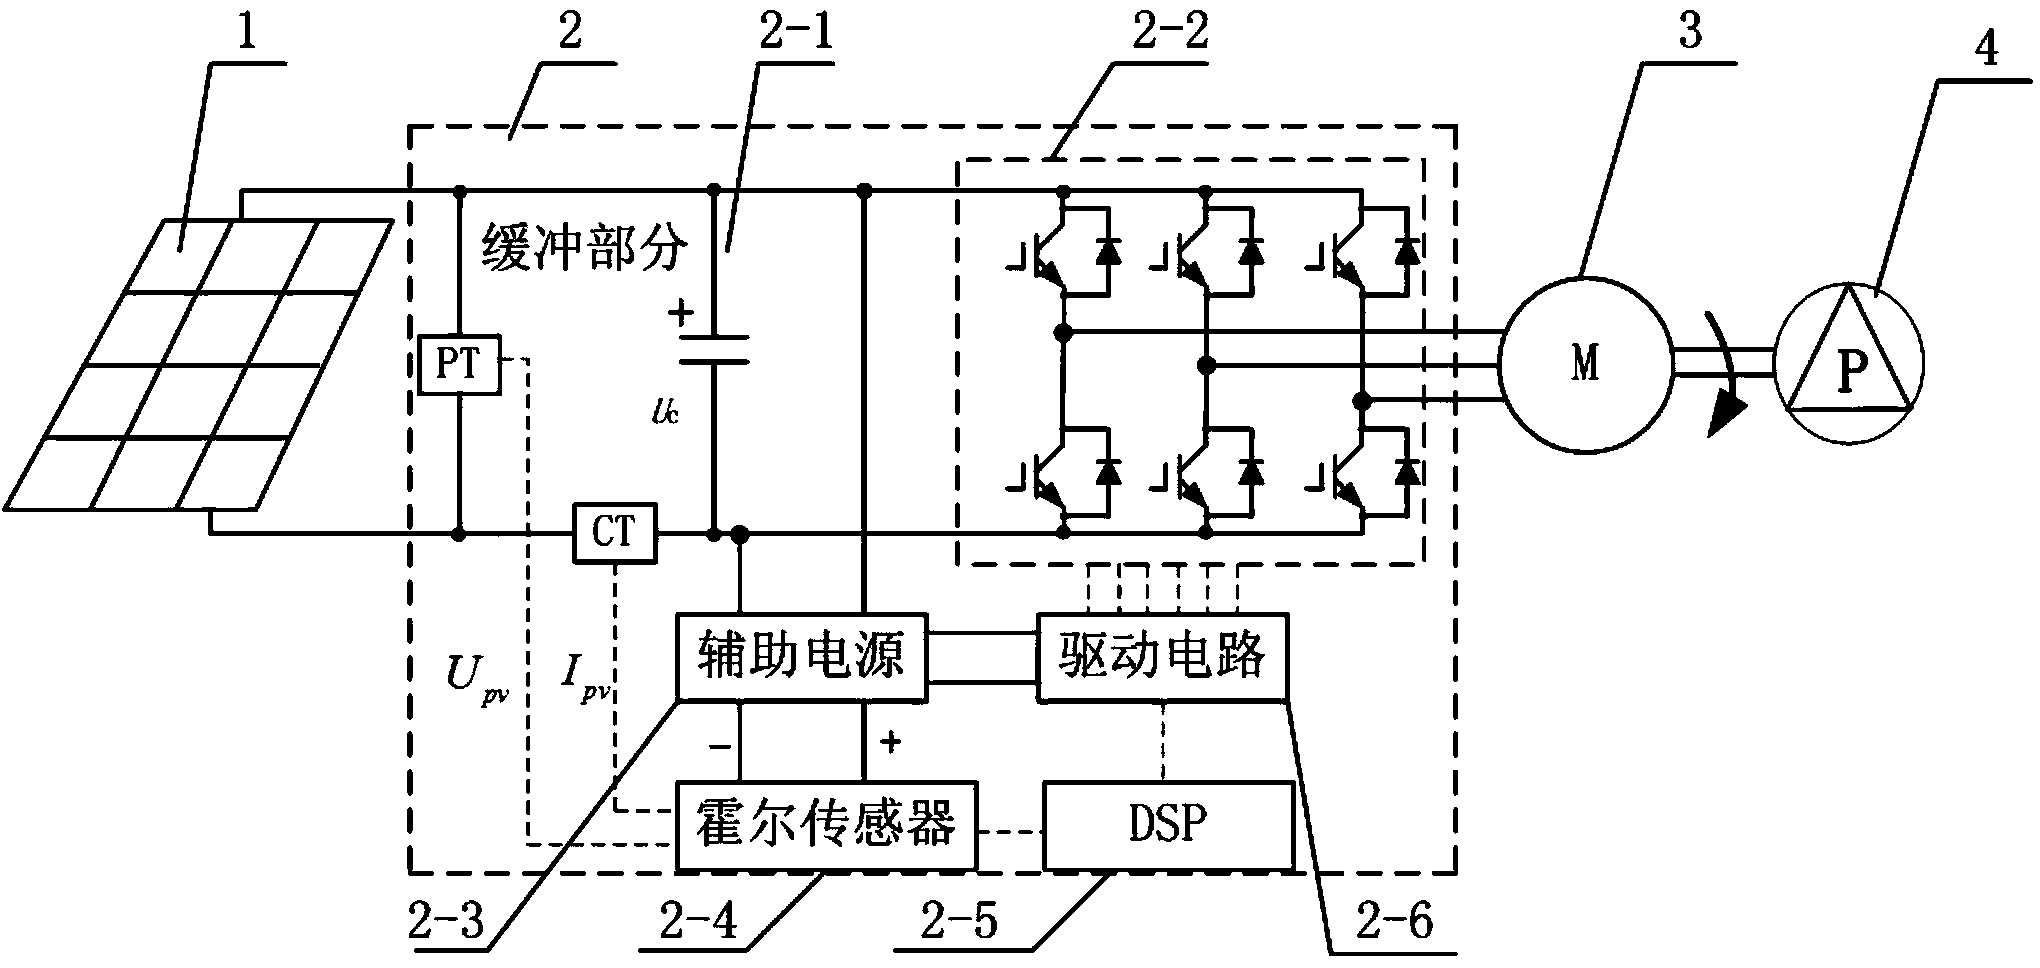 Single-stage type photovoltaic water pump control system and method